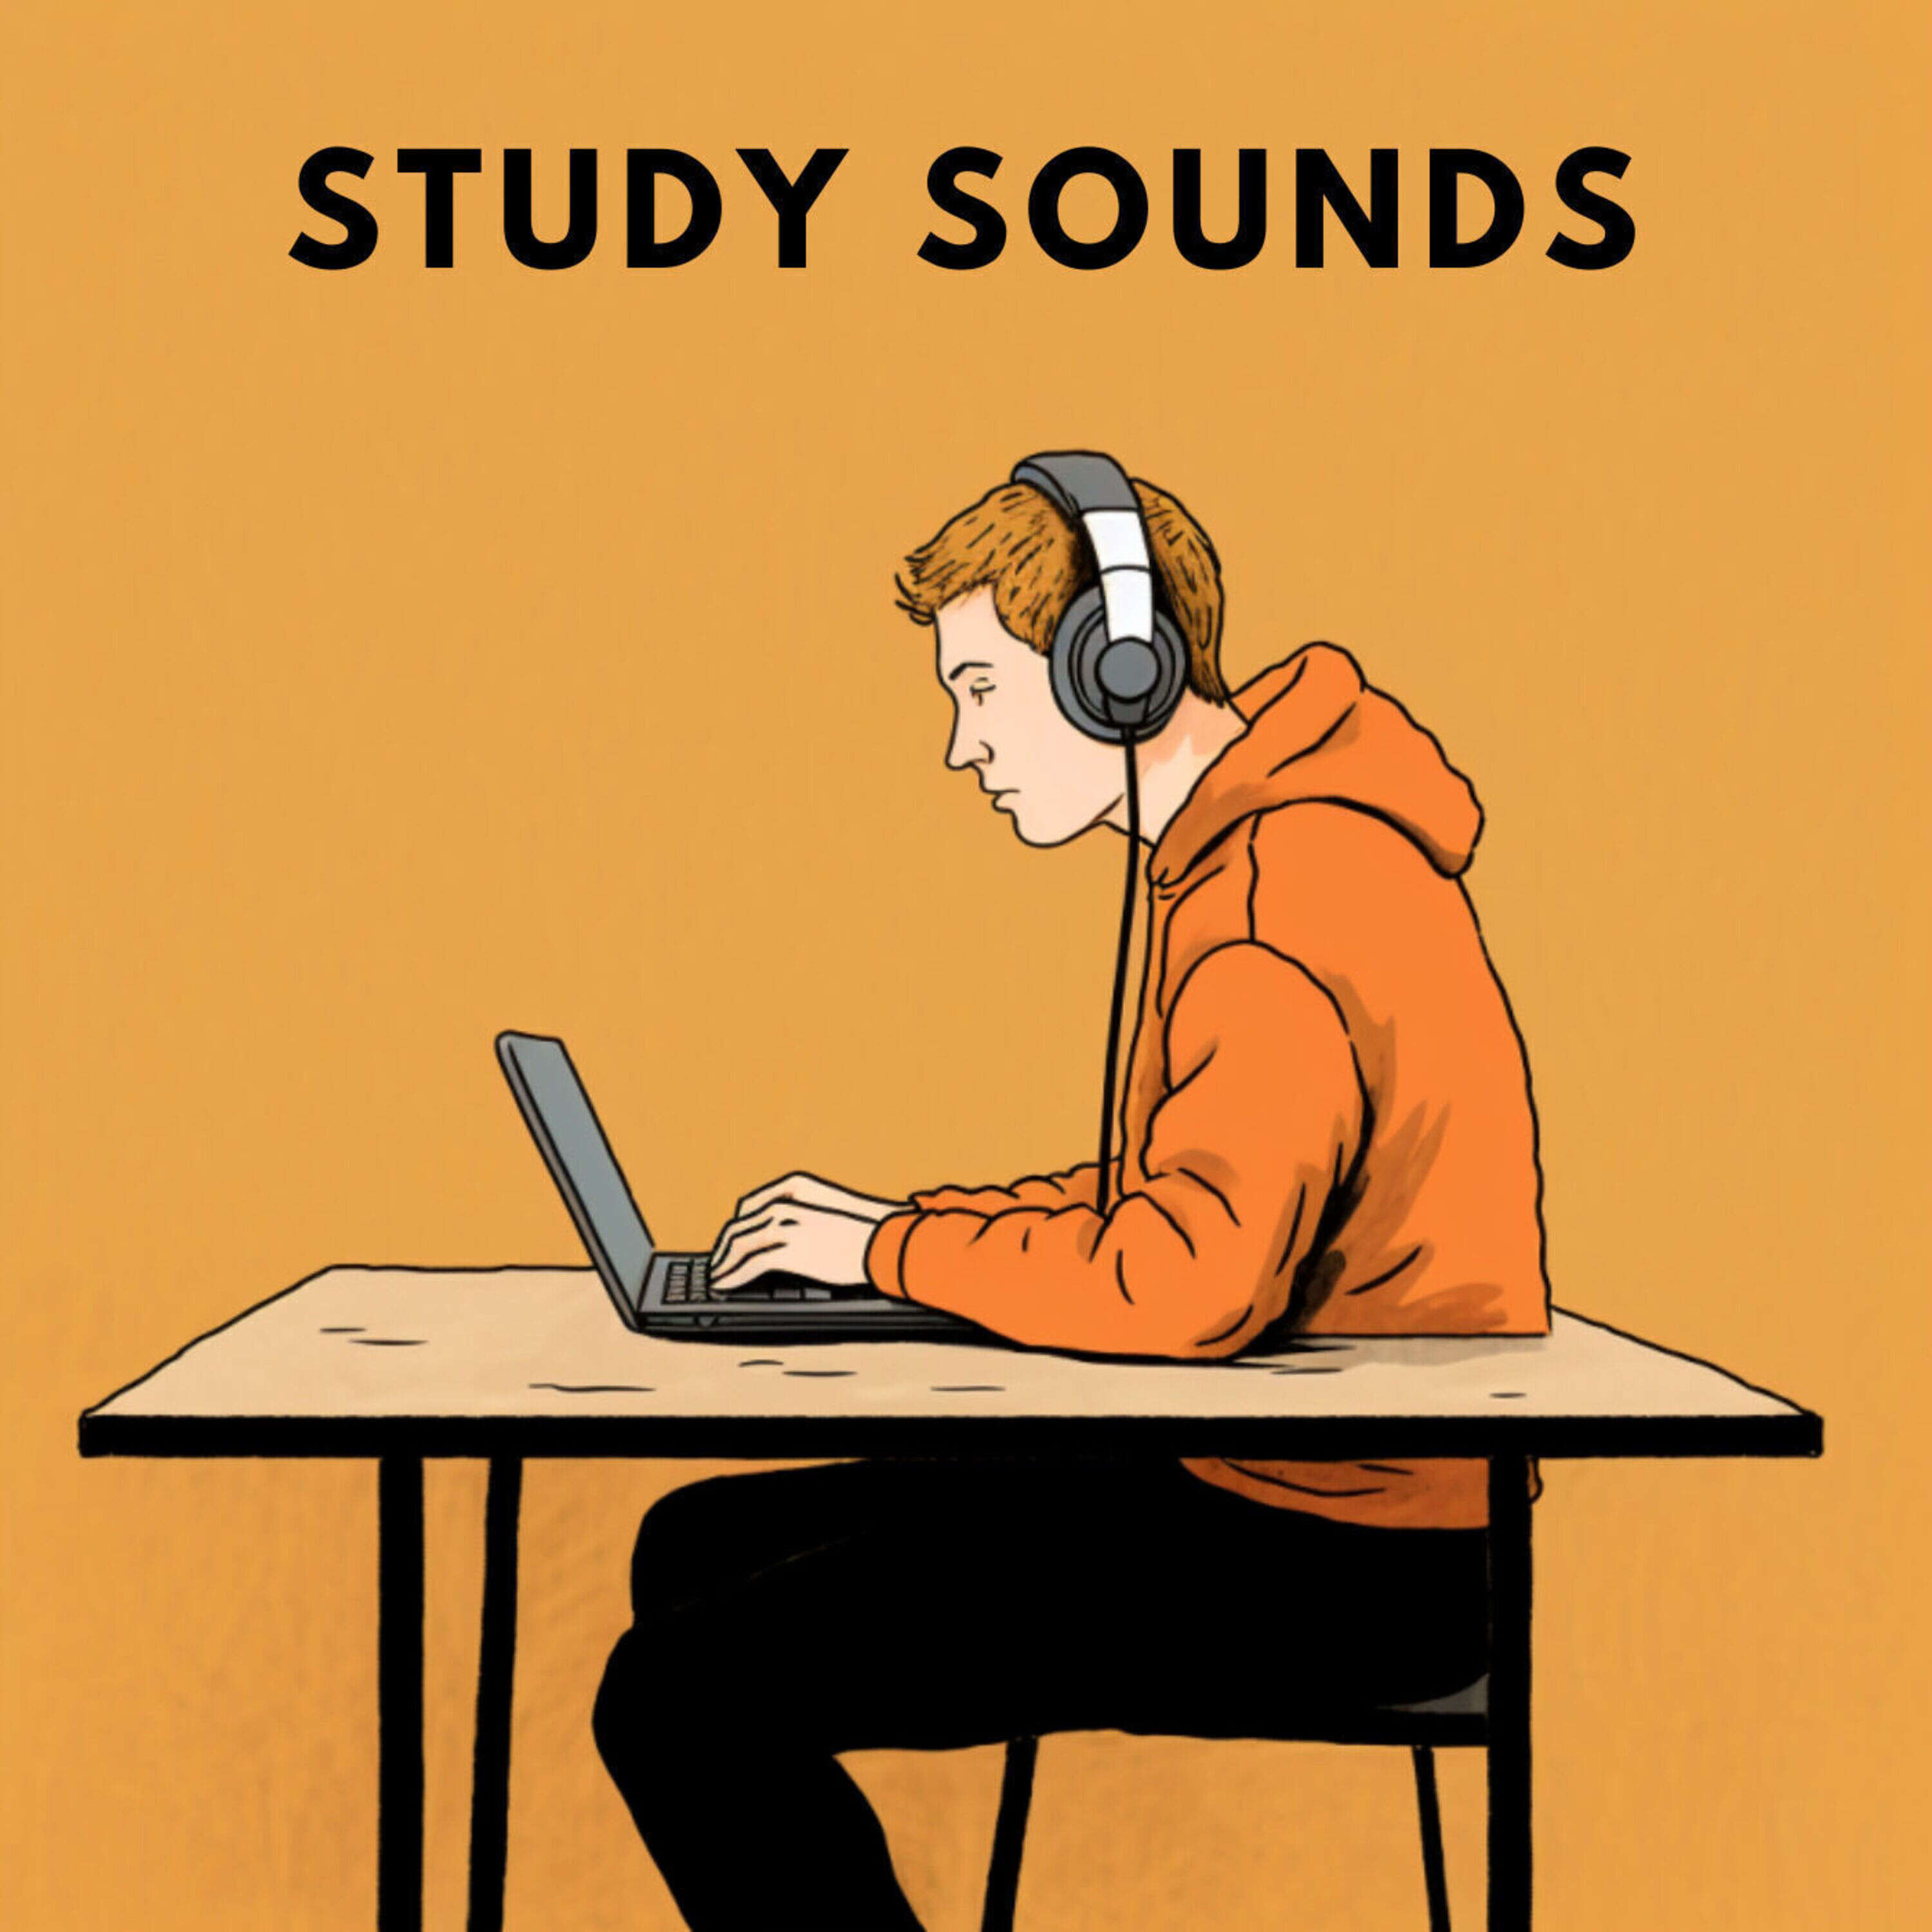 a study playlist while in your room